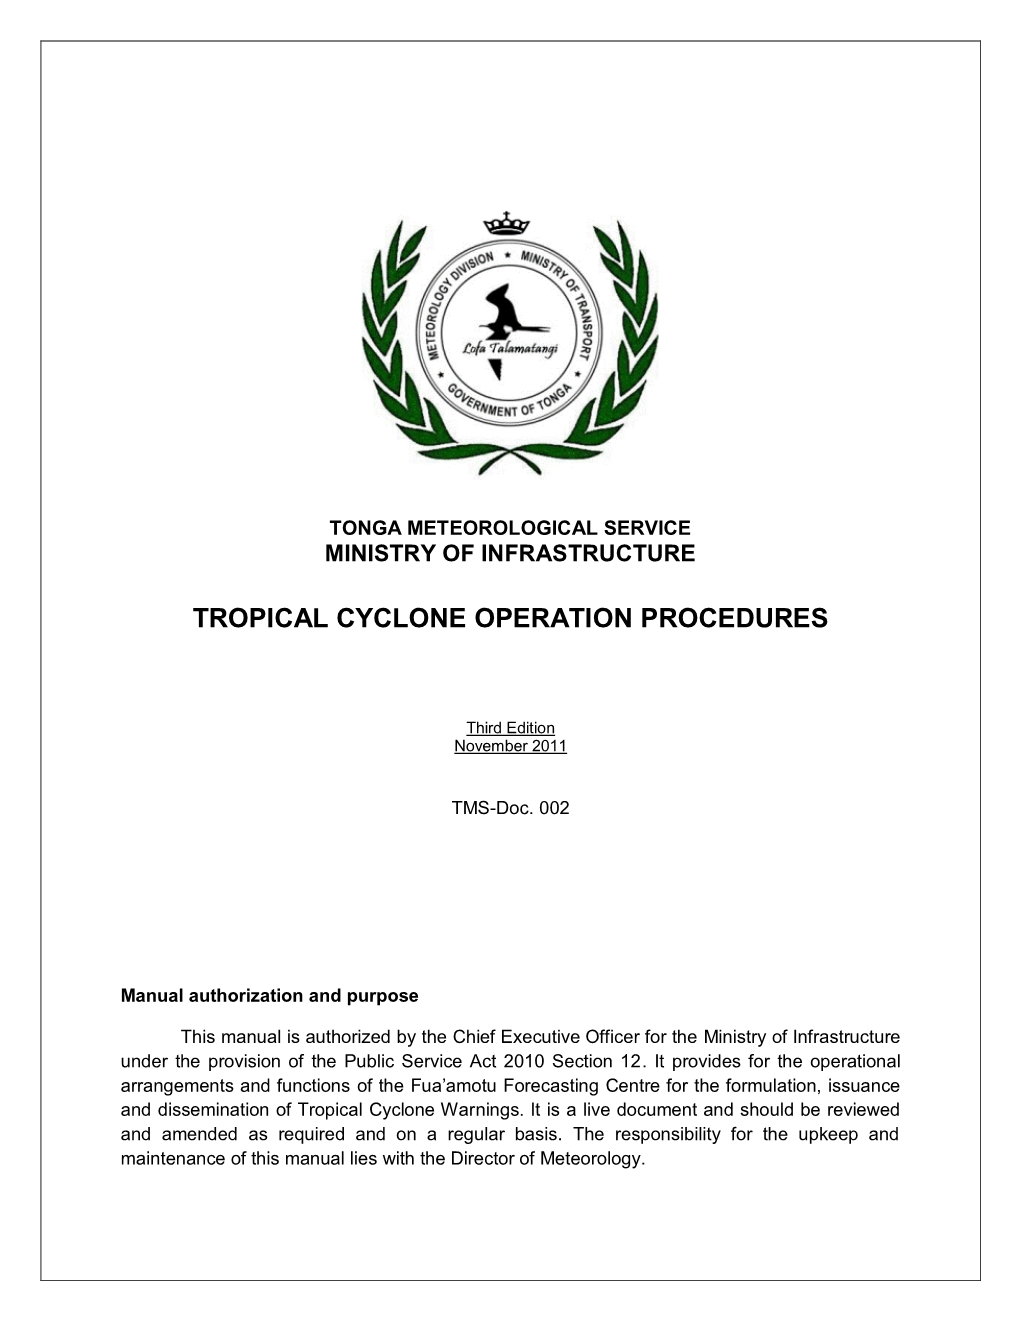 Tropical Cyclone Operation Procedures